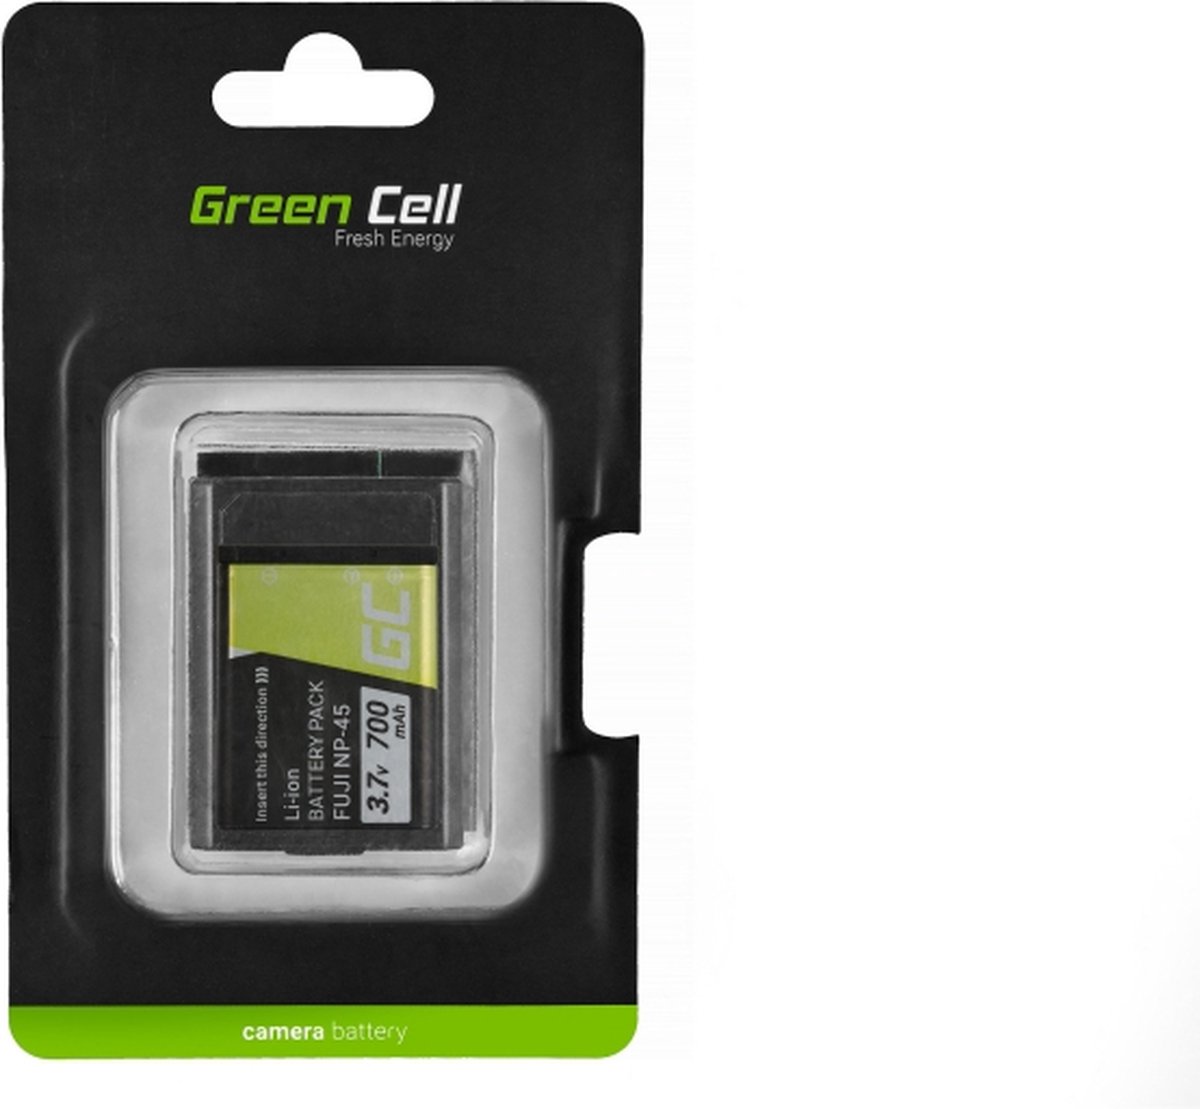 GREEN CELL Digital Camera Batterij voor Nikon Coolpix AW100 AW110 AW120 S9500 S9300 S9200 S9100 S8200 S8100 S6300 3.7V 700mAh